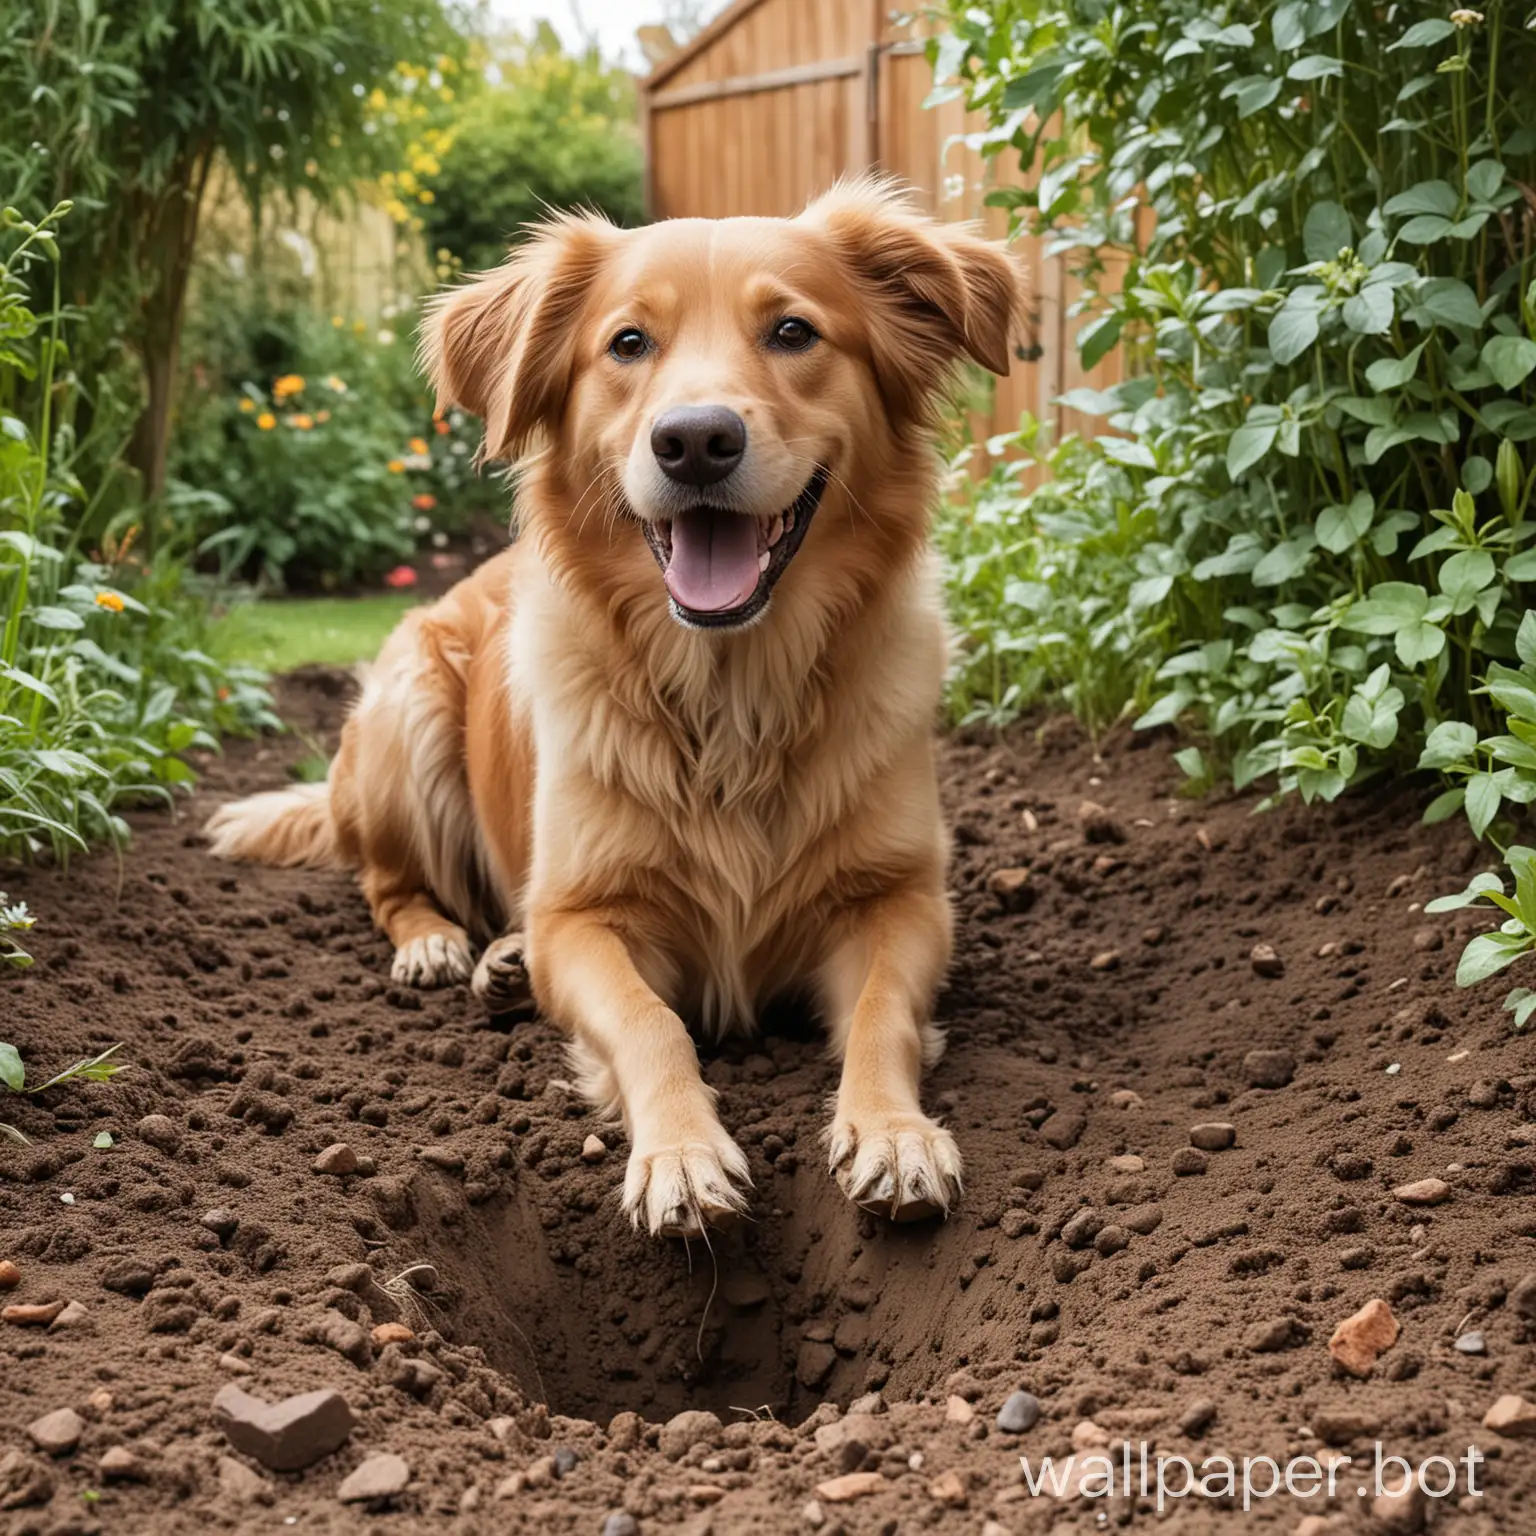 A happy dog in the garden digging a hole for fiber optics, he also has a van